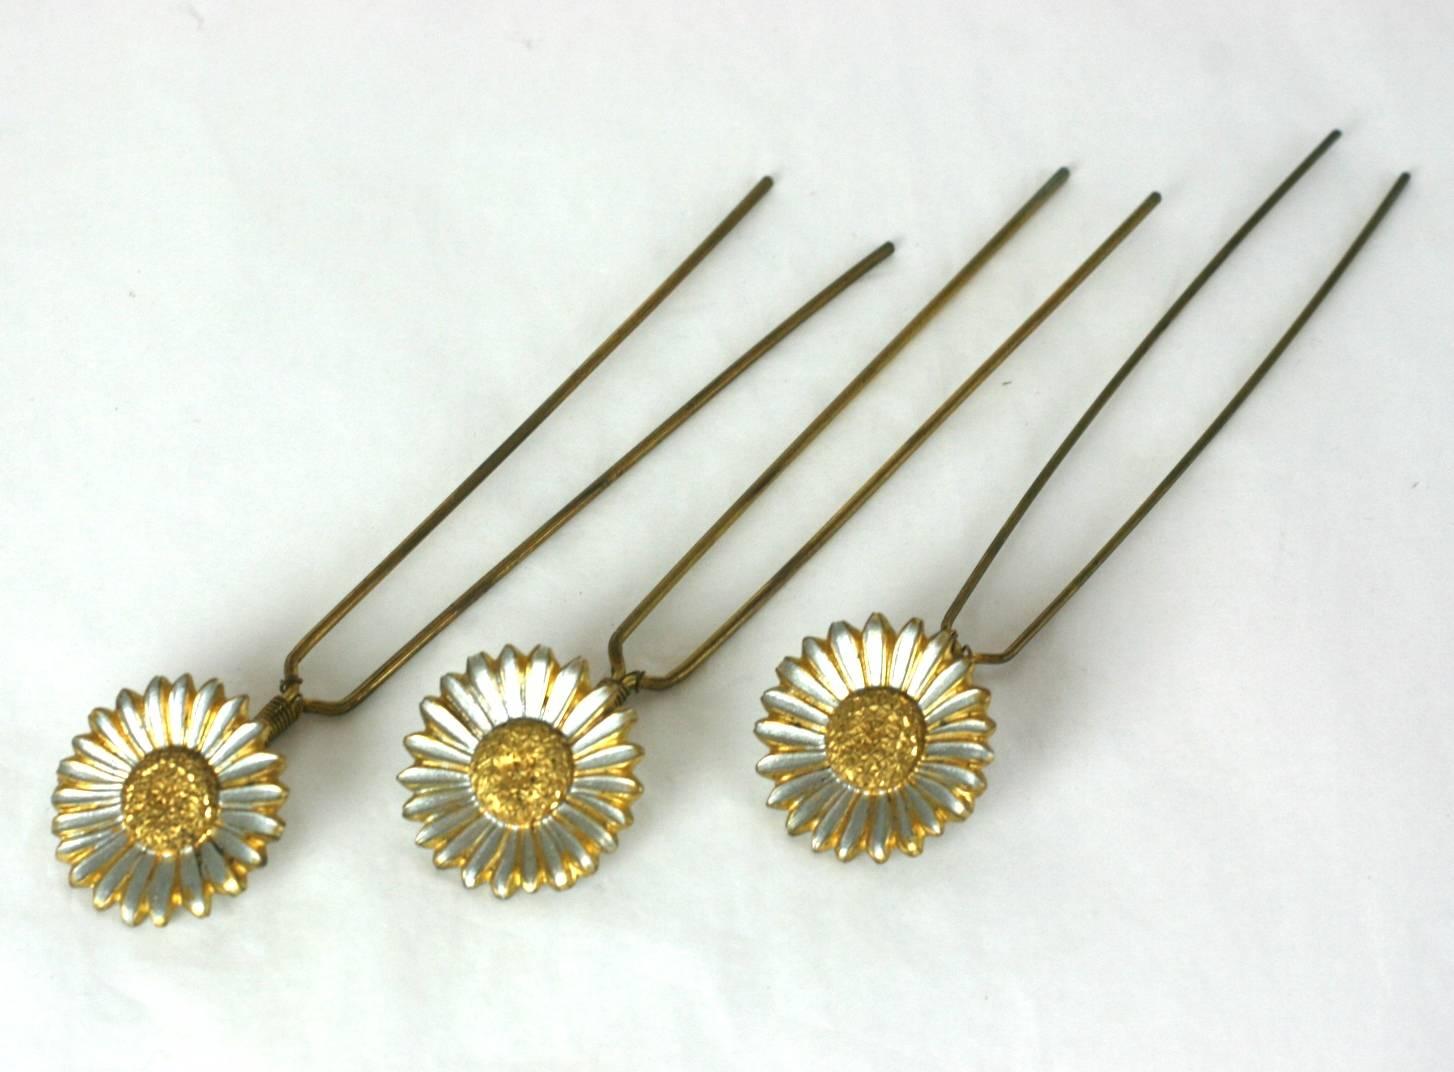 Charming set of Victorian Tremblant Sunflower Hair Picks in silvered and gilt metal. Flowers are set on springs and sway gently with wearer. 
Sunflowers were a popular motif in the Aesthetic movement in the Decorative Arts of the 19th Century.